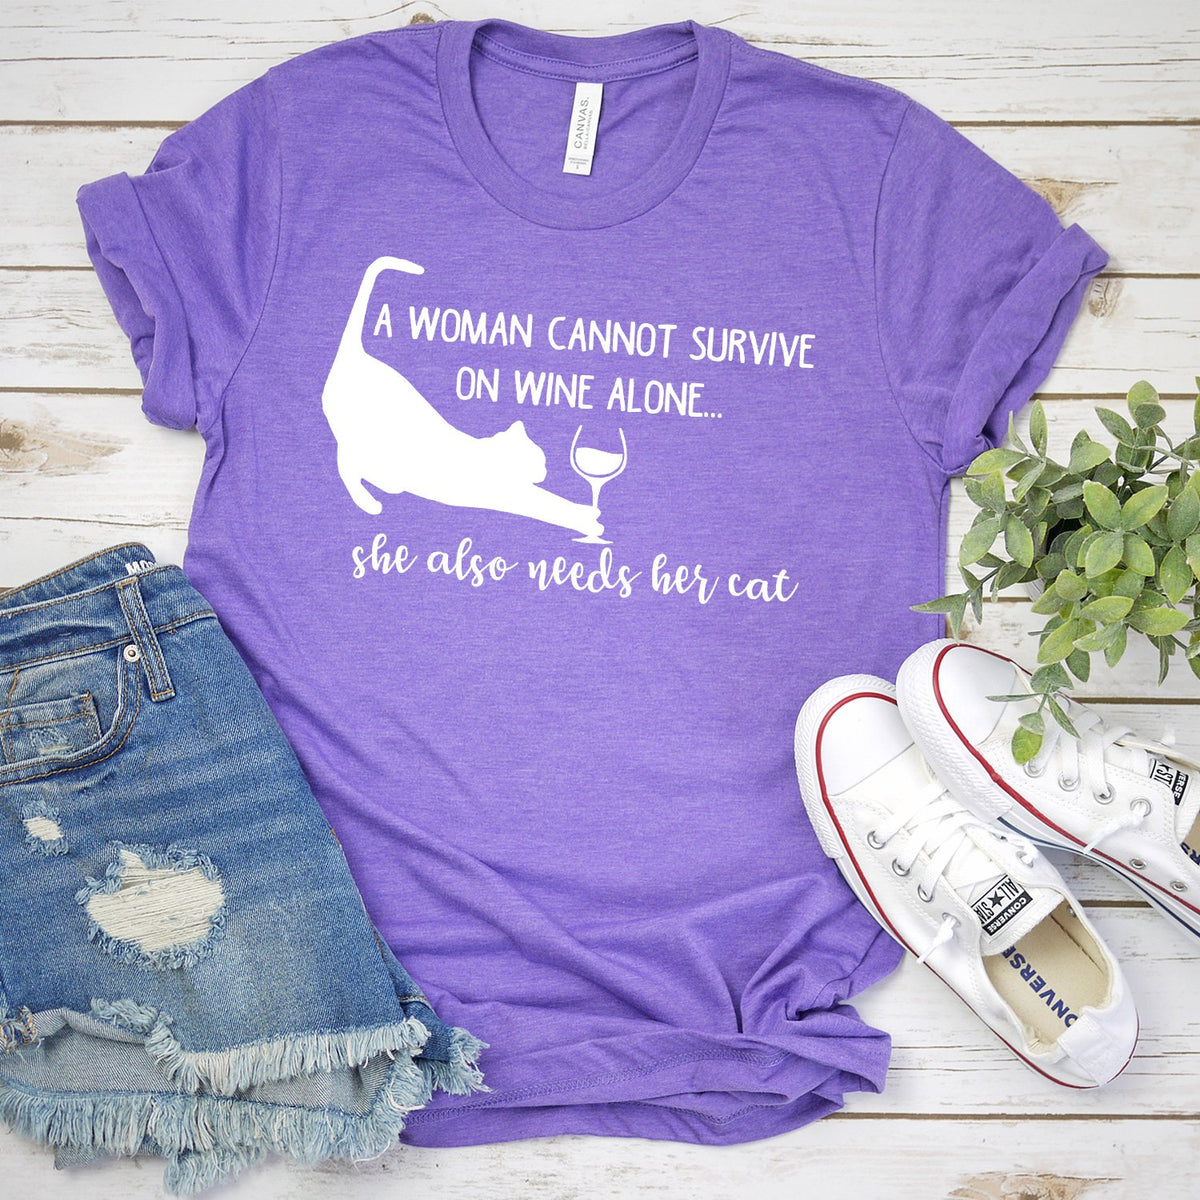 A Woman Cannot Survive on Wine Alone, She also Needs her Cat - Short Sleeve Tee Shirt